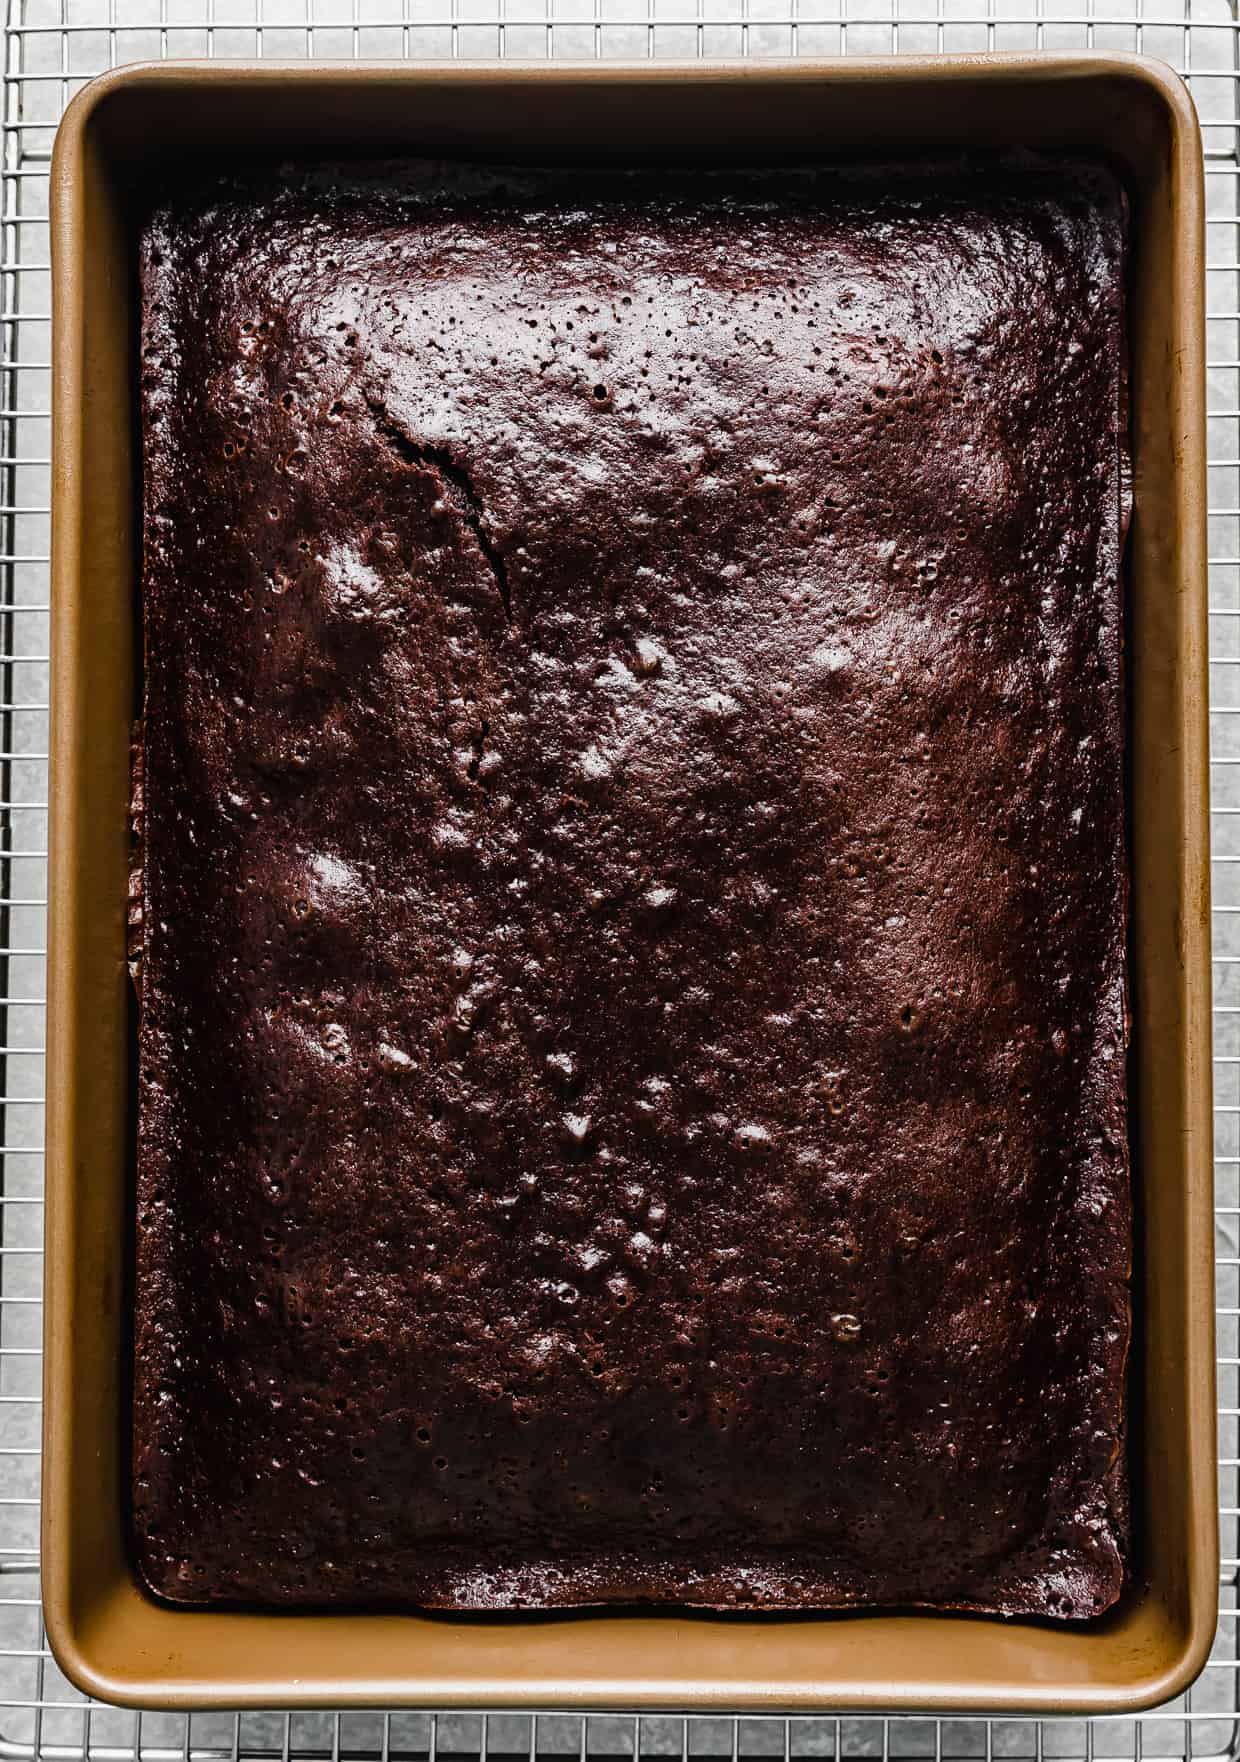 A chocolate cake baked in a 13x9 inch pan.